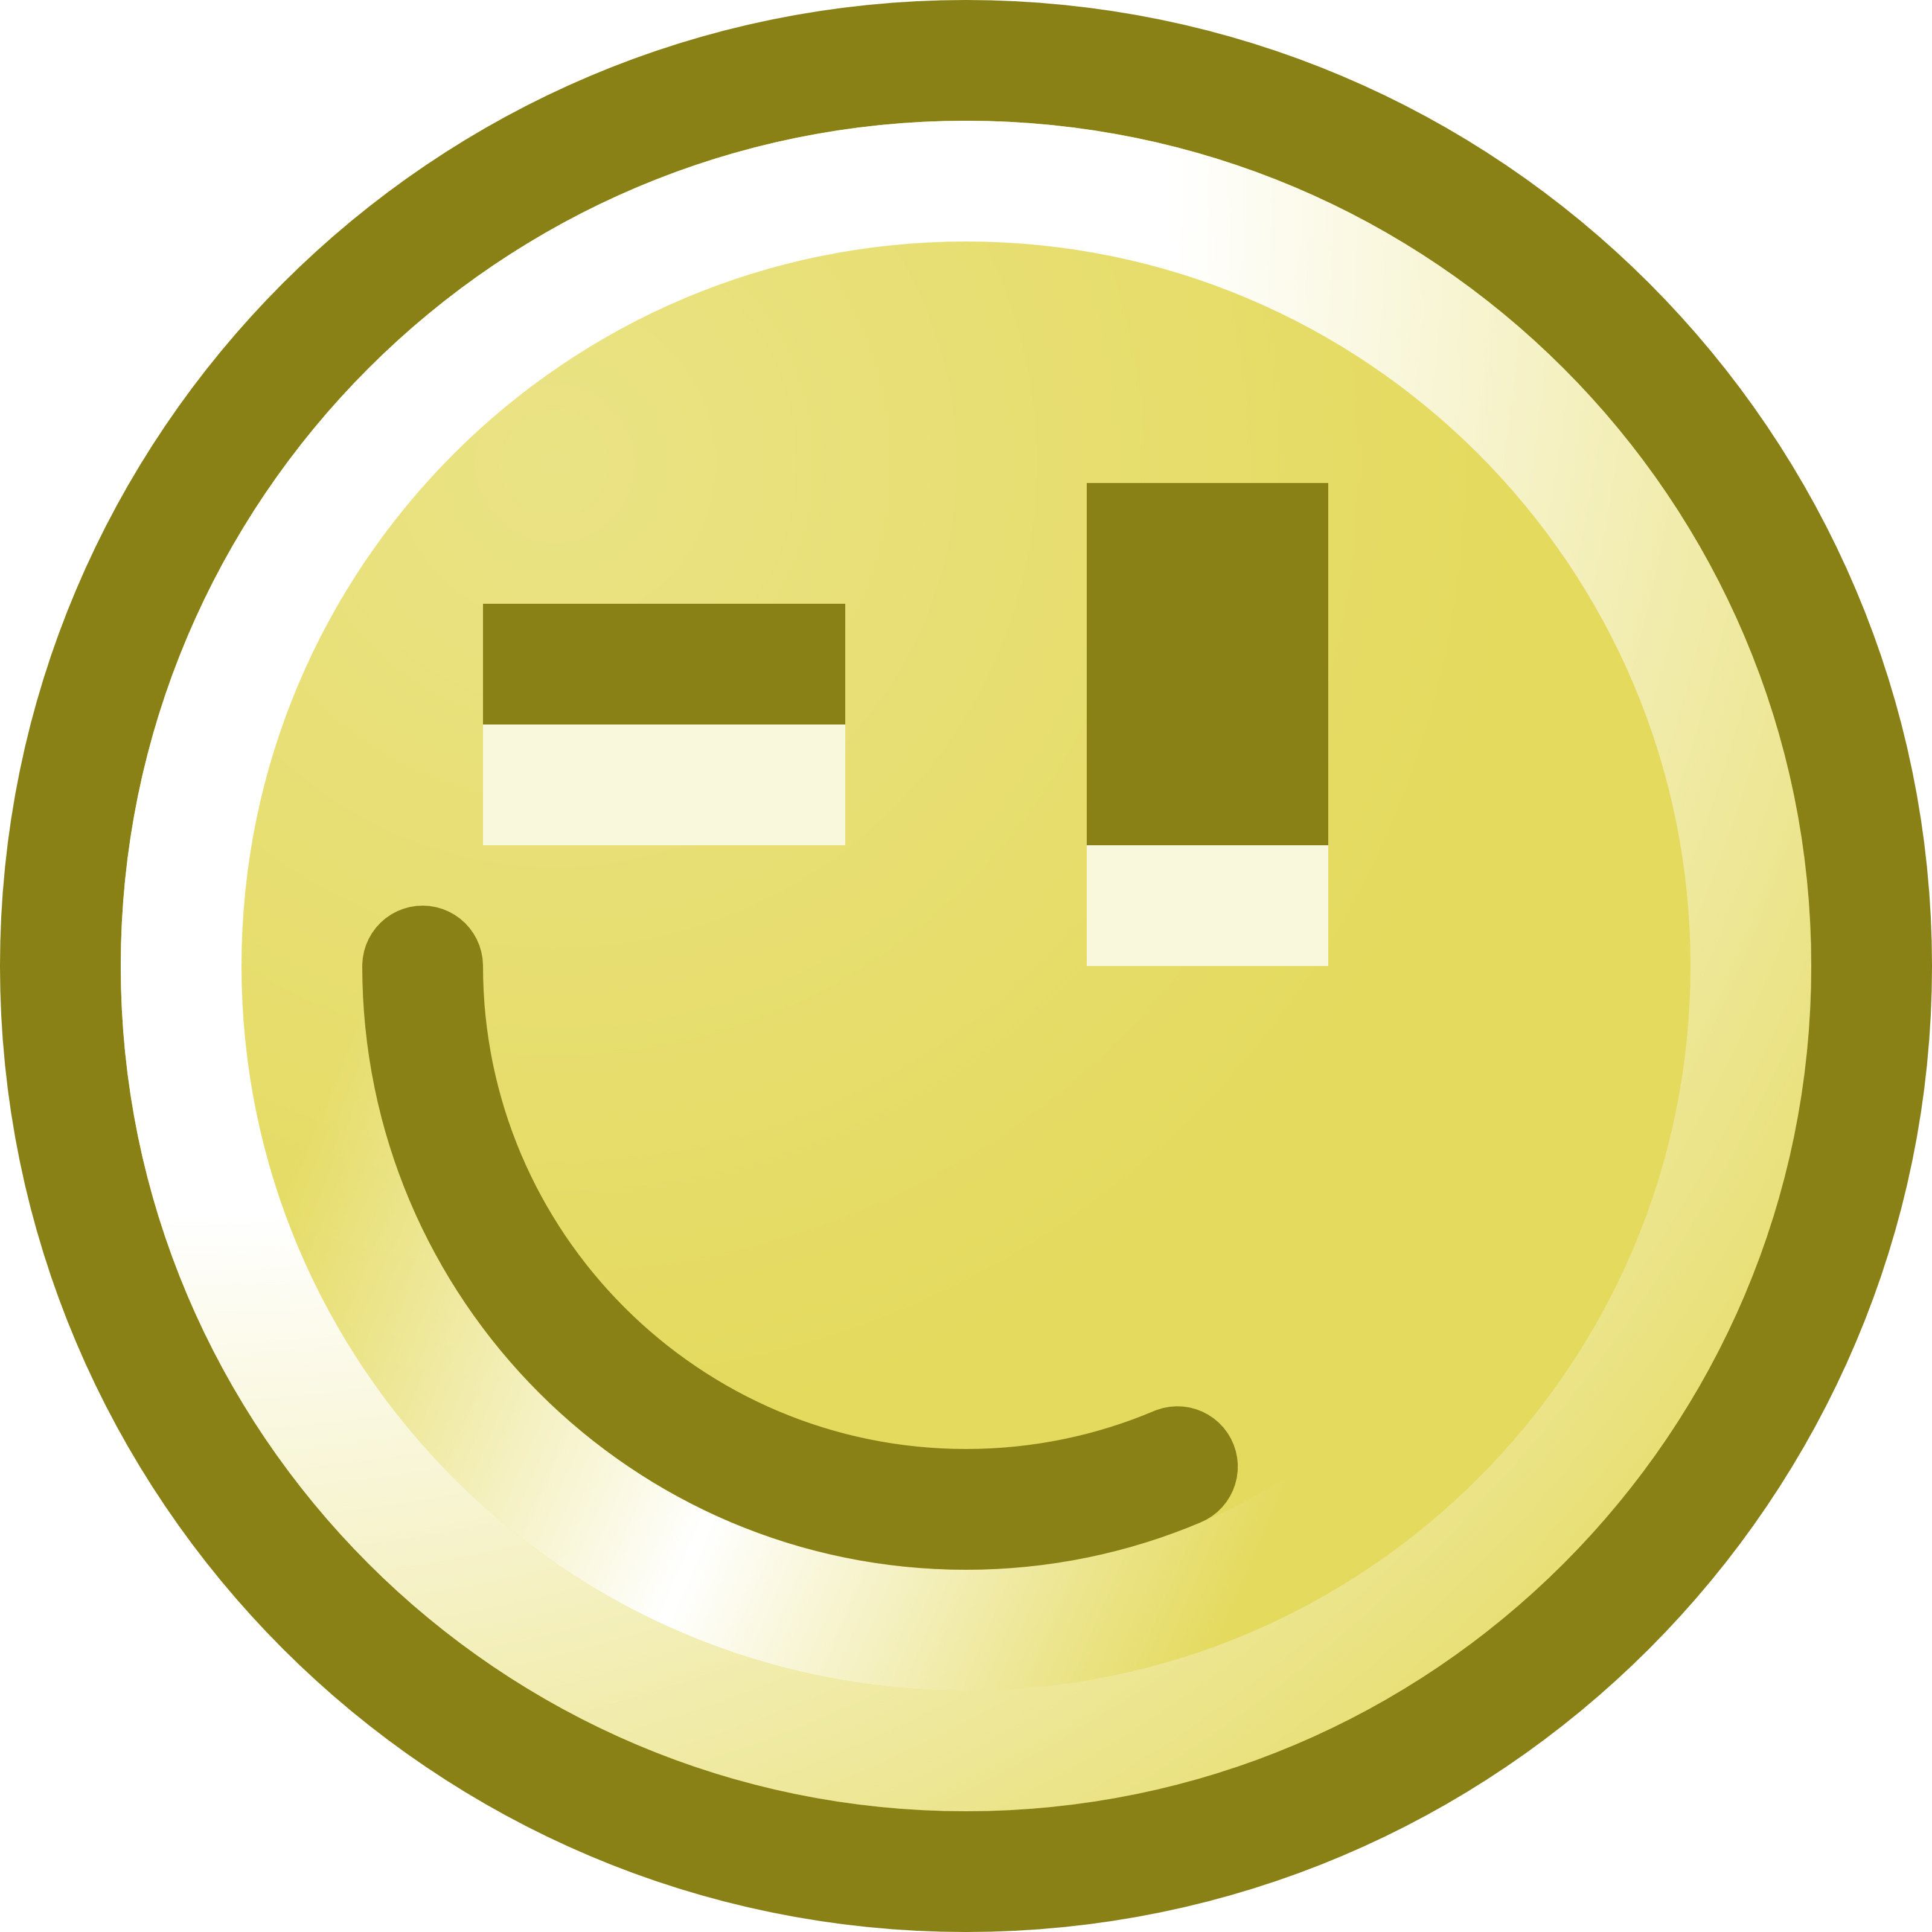 Wink smiley face with mustache and thumbs up free clip art